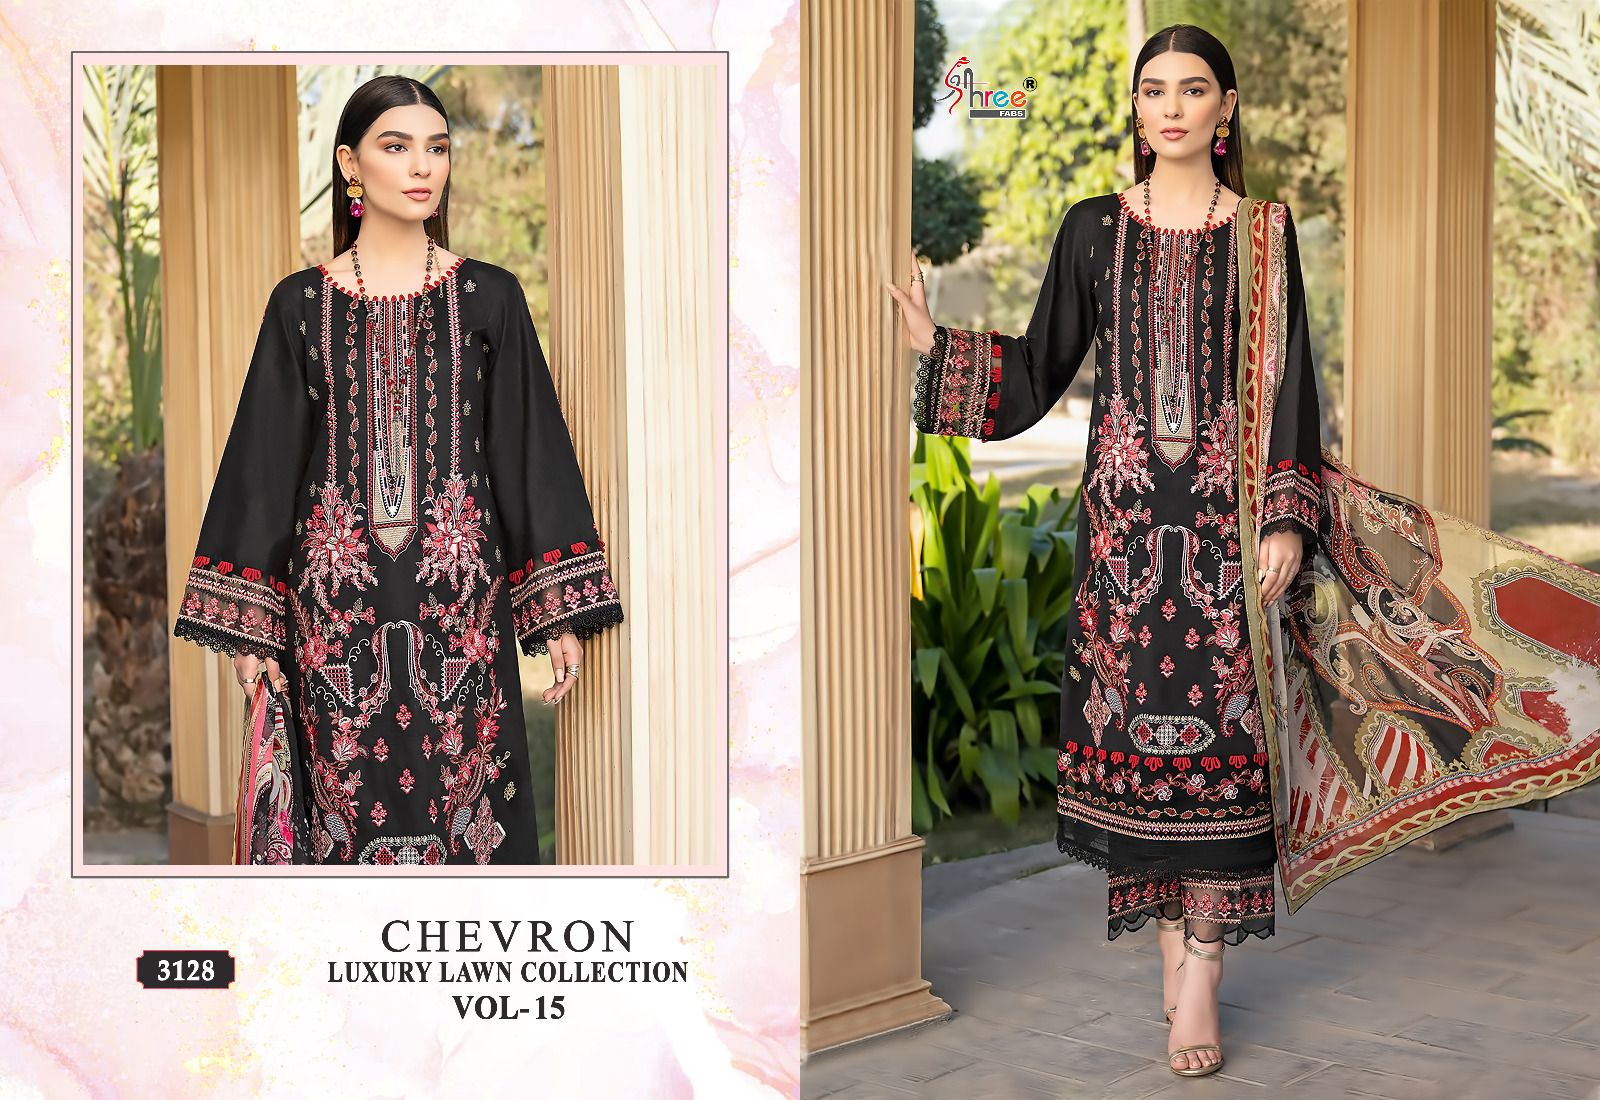 Shree Chevron Luxury Lawn Collection Vol 15 collection 8